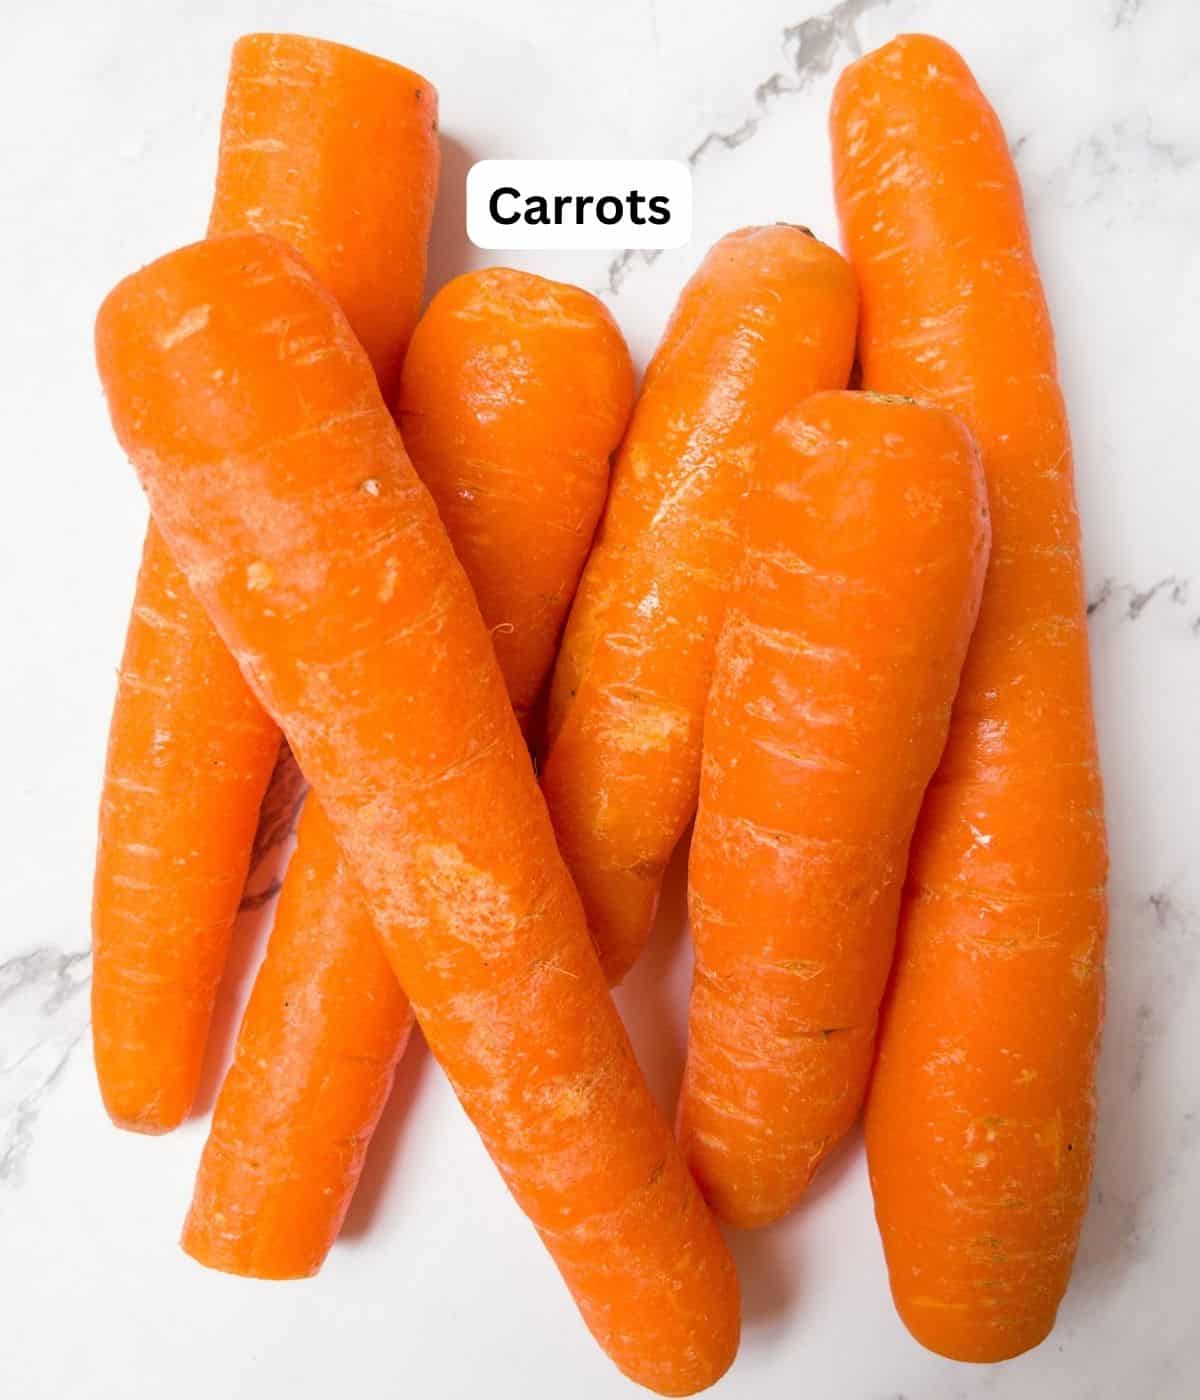 6 carrots piled on top of each other.